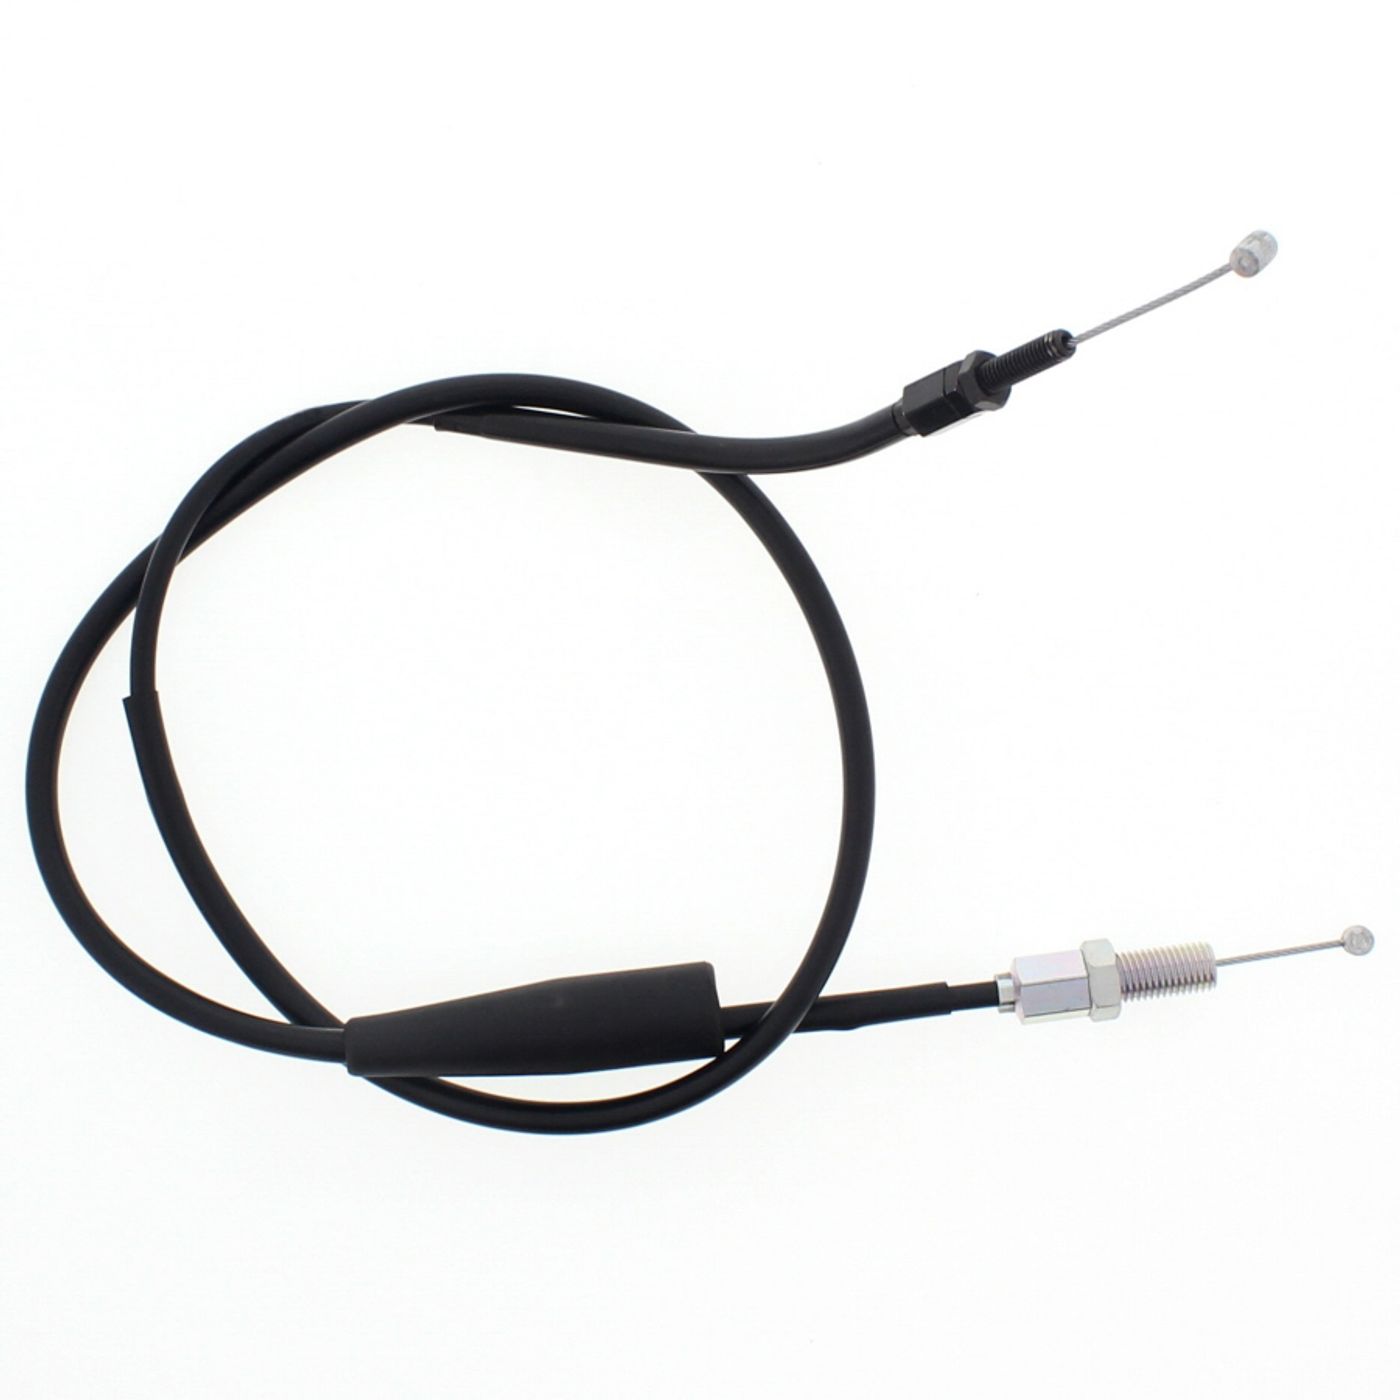 Wrp Throttle Cables - WRP451133 image